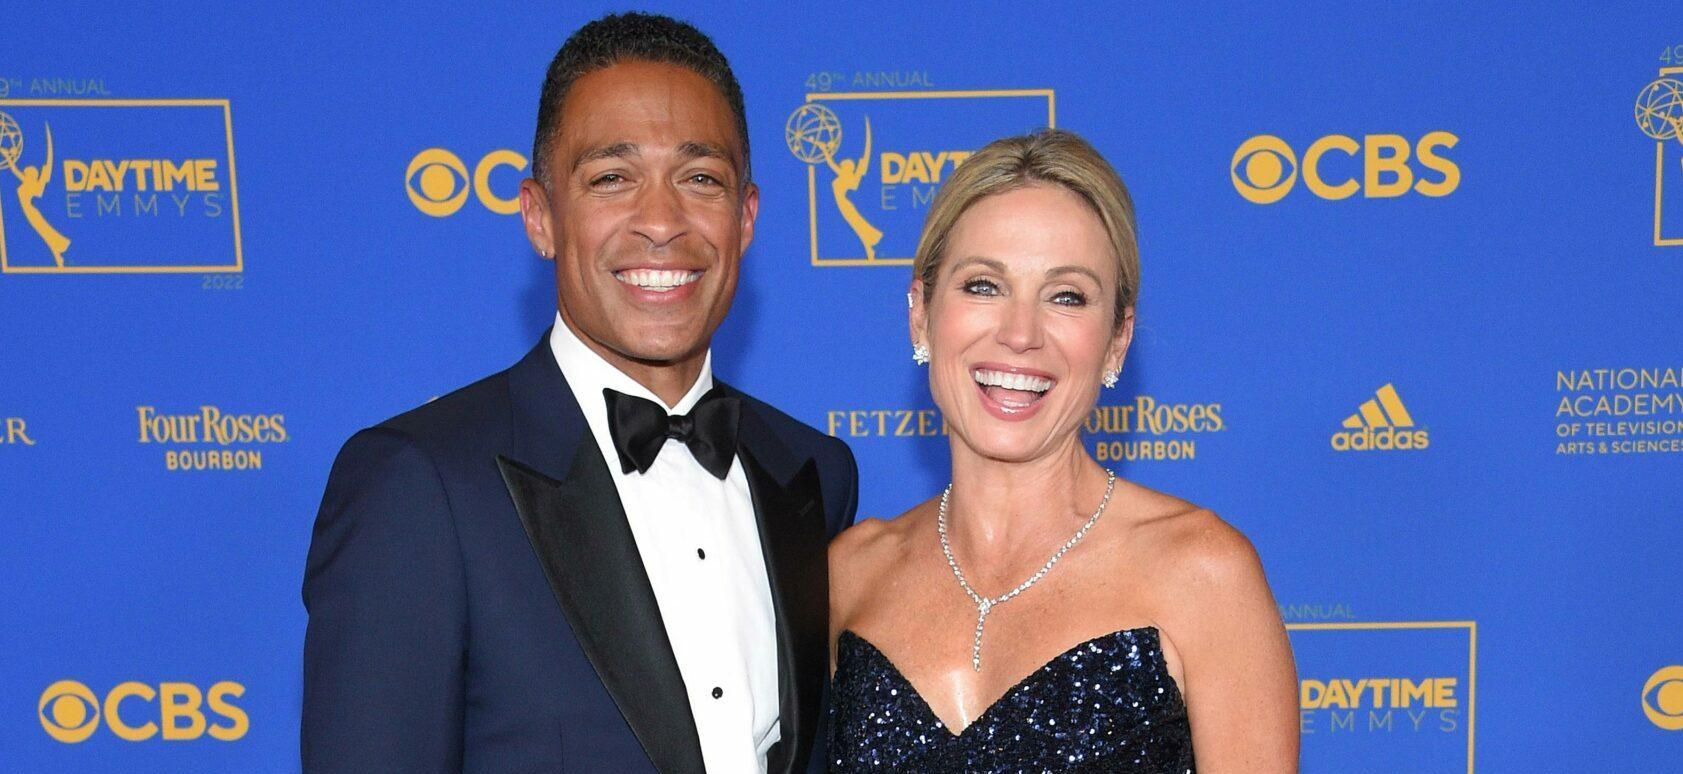 Amy Robach Reportedly Turned Down NewsNation Talk Show Offer To Wait For The ‘Right Opportunity’